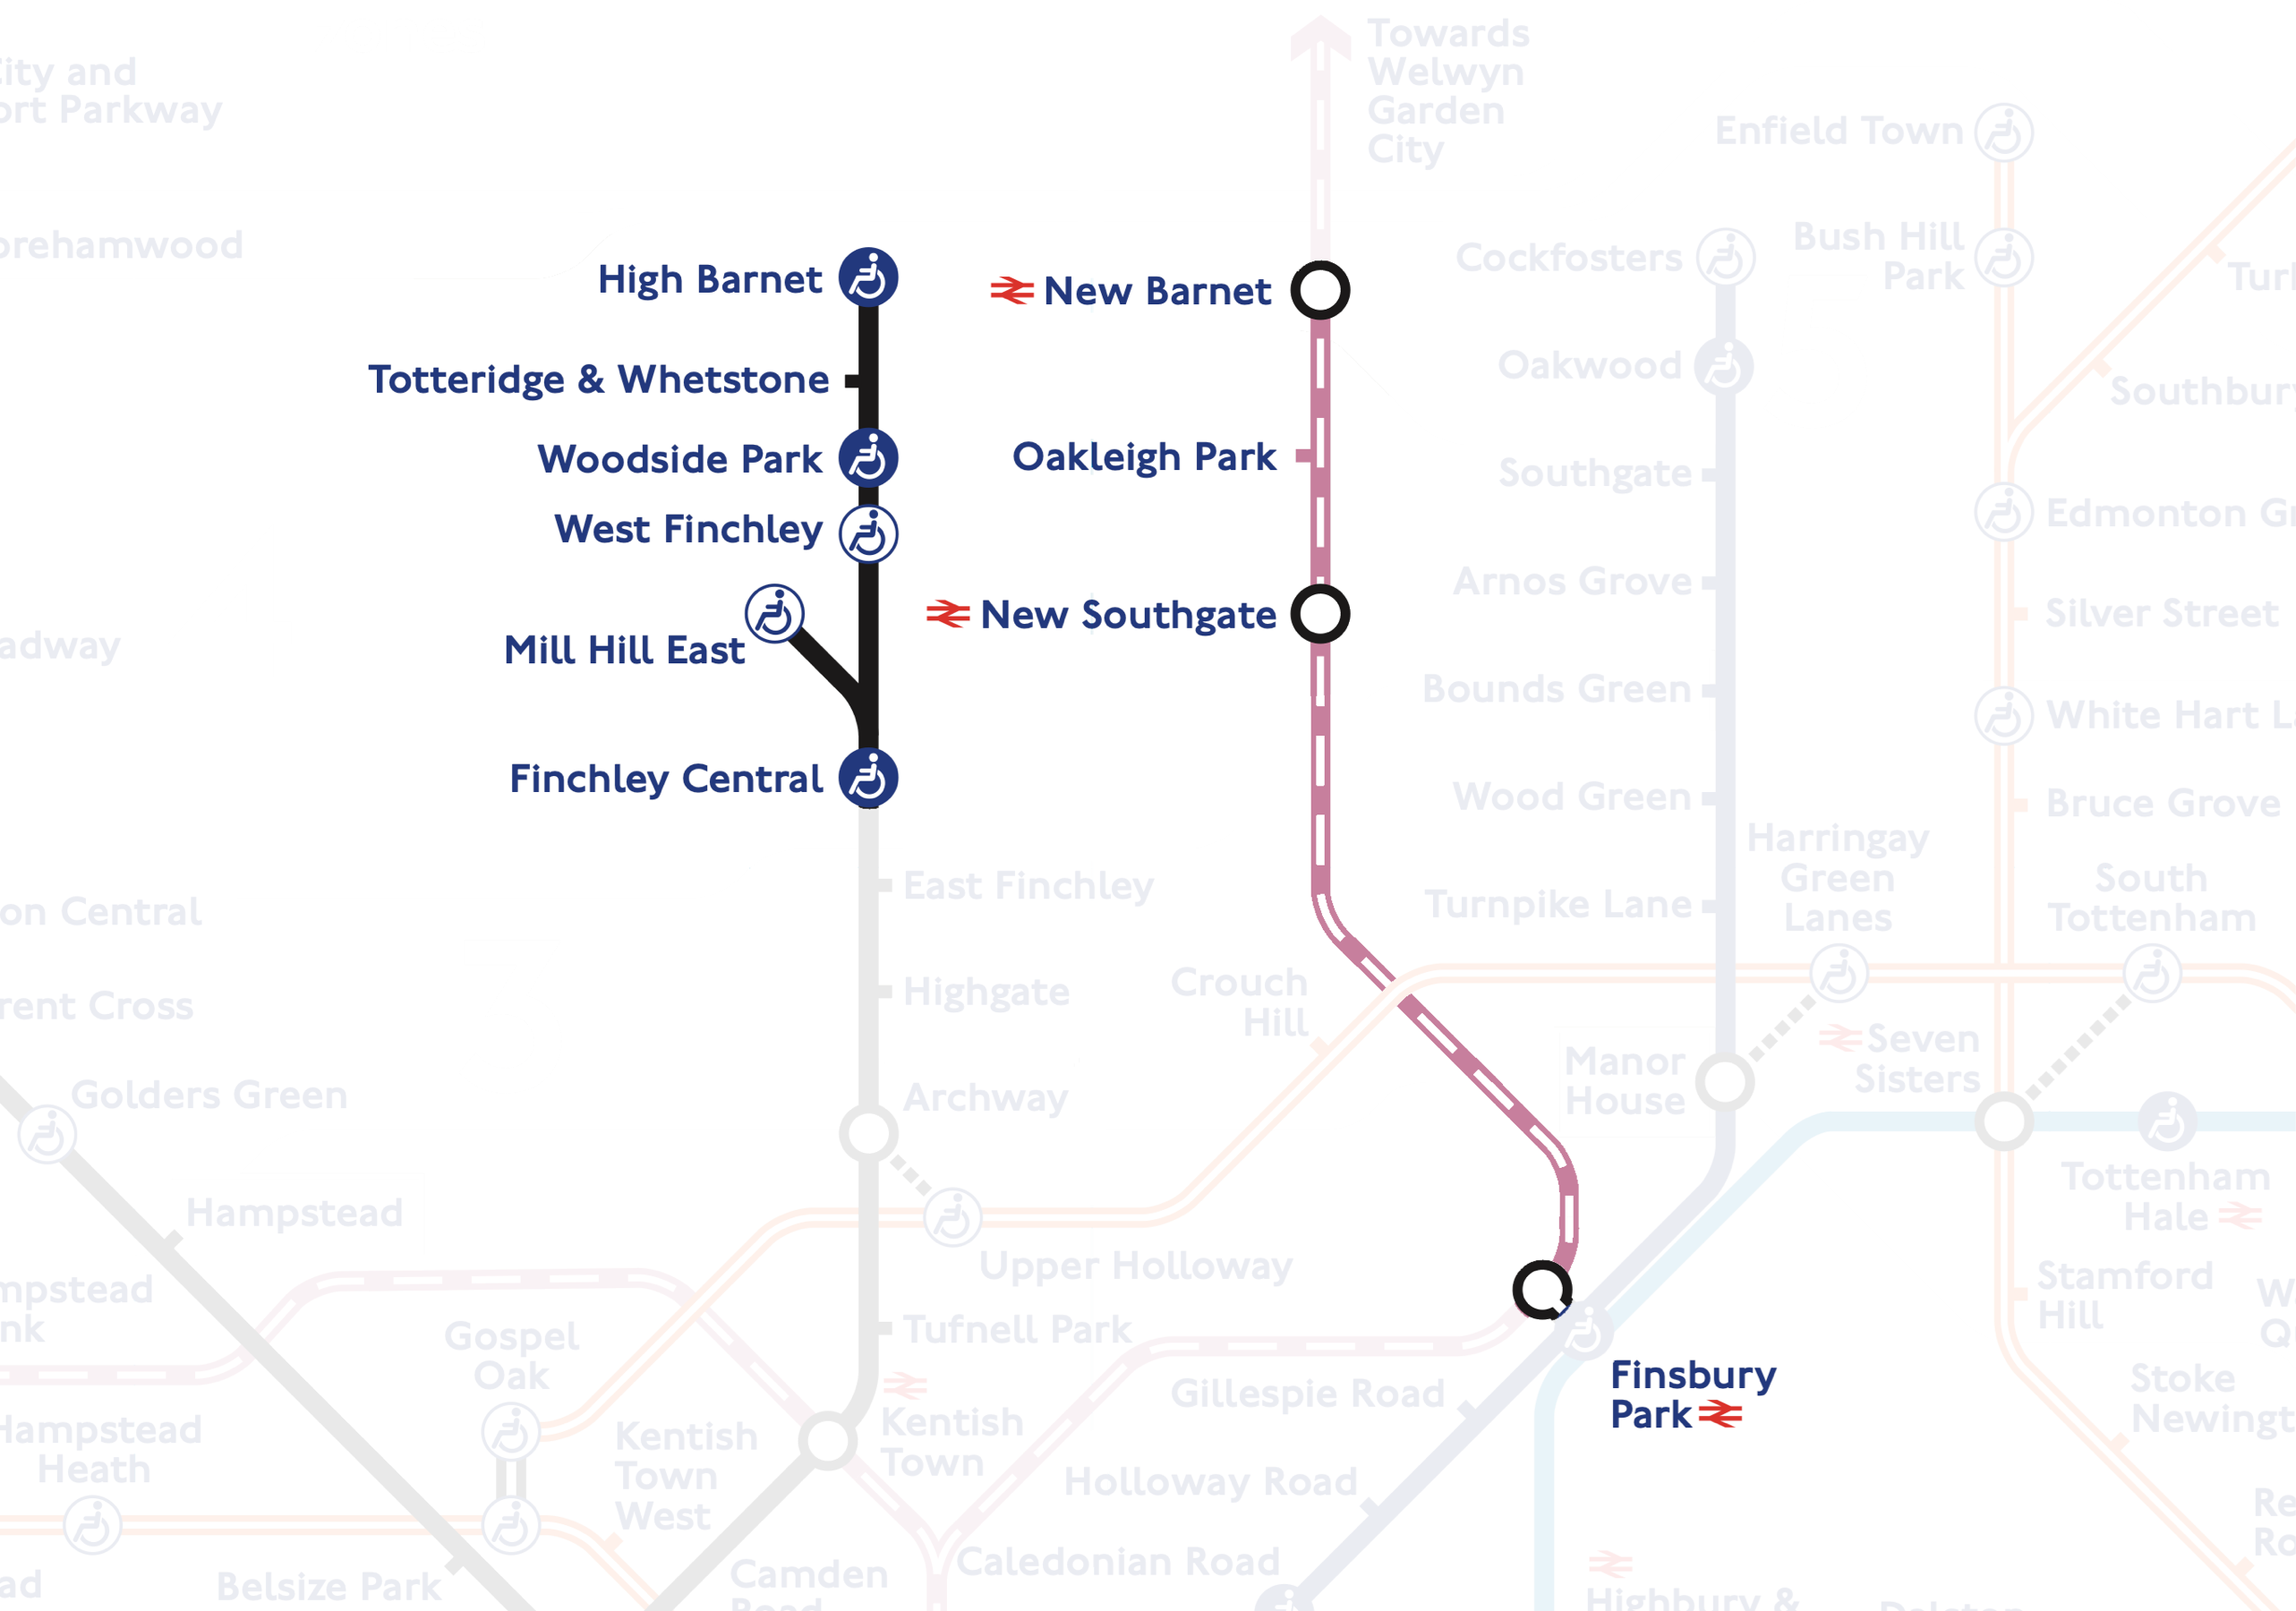 The Mill Hill East and High Barnet branches of the Northern line and the Thameslink from New Barnet to Finsbury Park